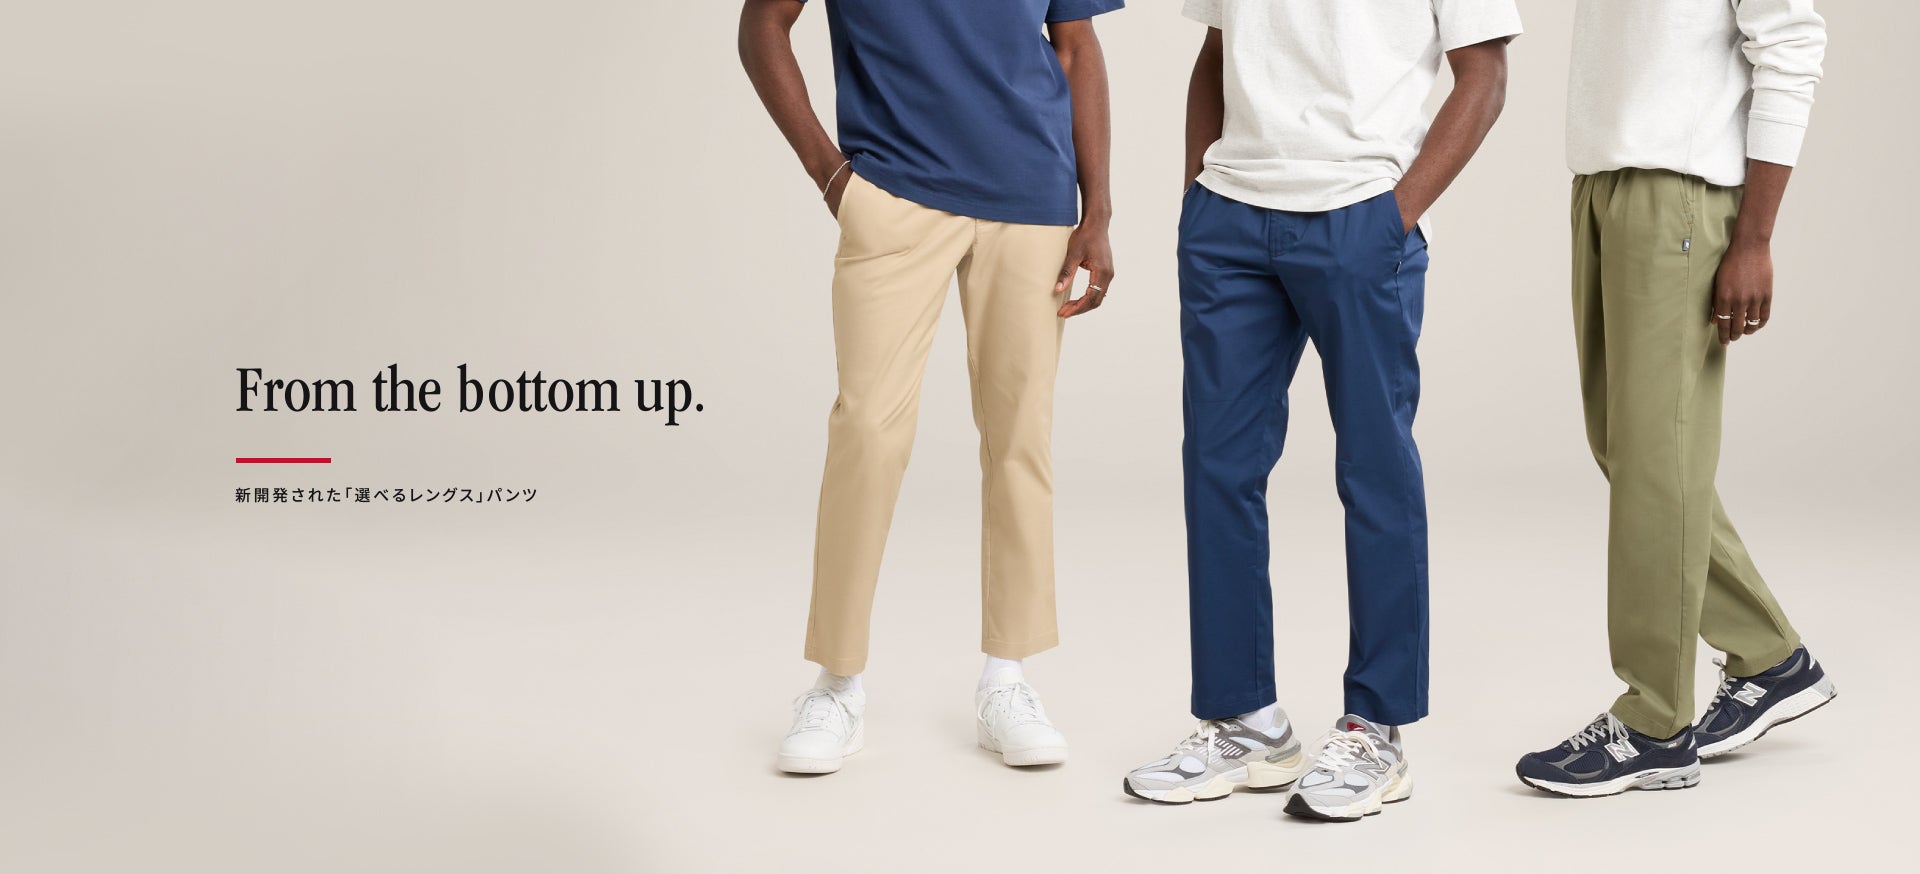 New Balance Pants Collection | Newly developed "selectable length" pants